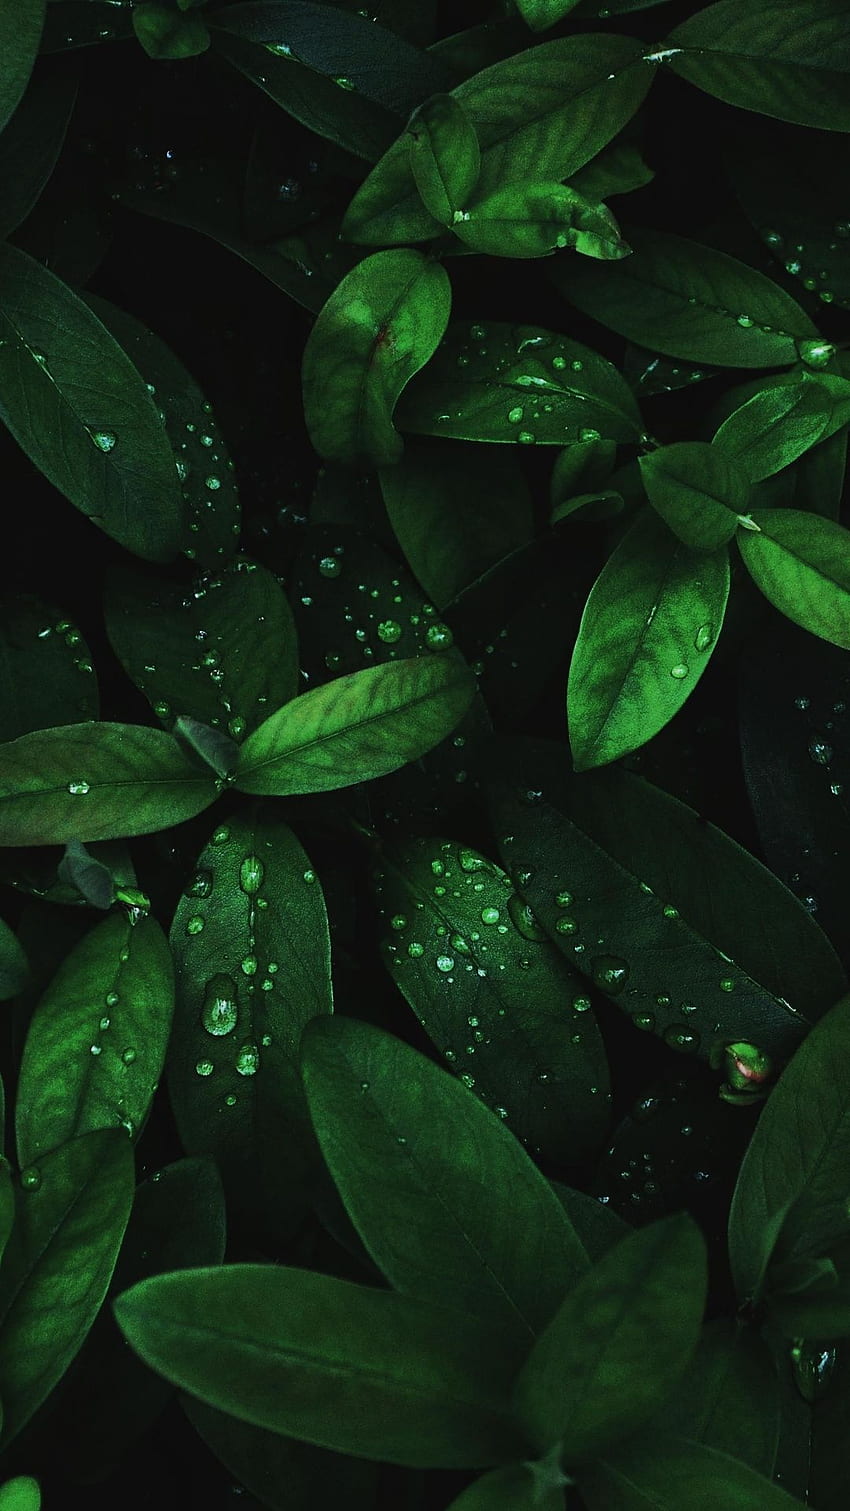 1500 Plant Wallpaper Pictures  Download Free Images on Unsplash